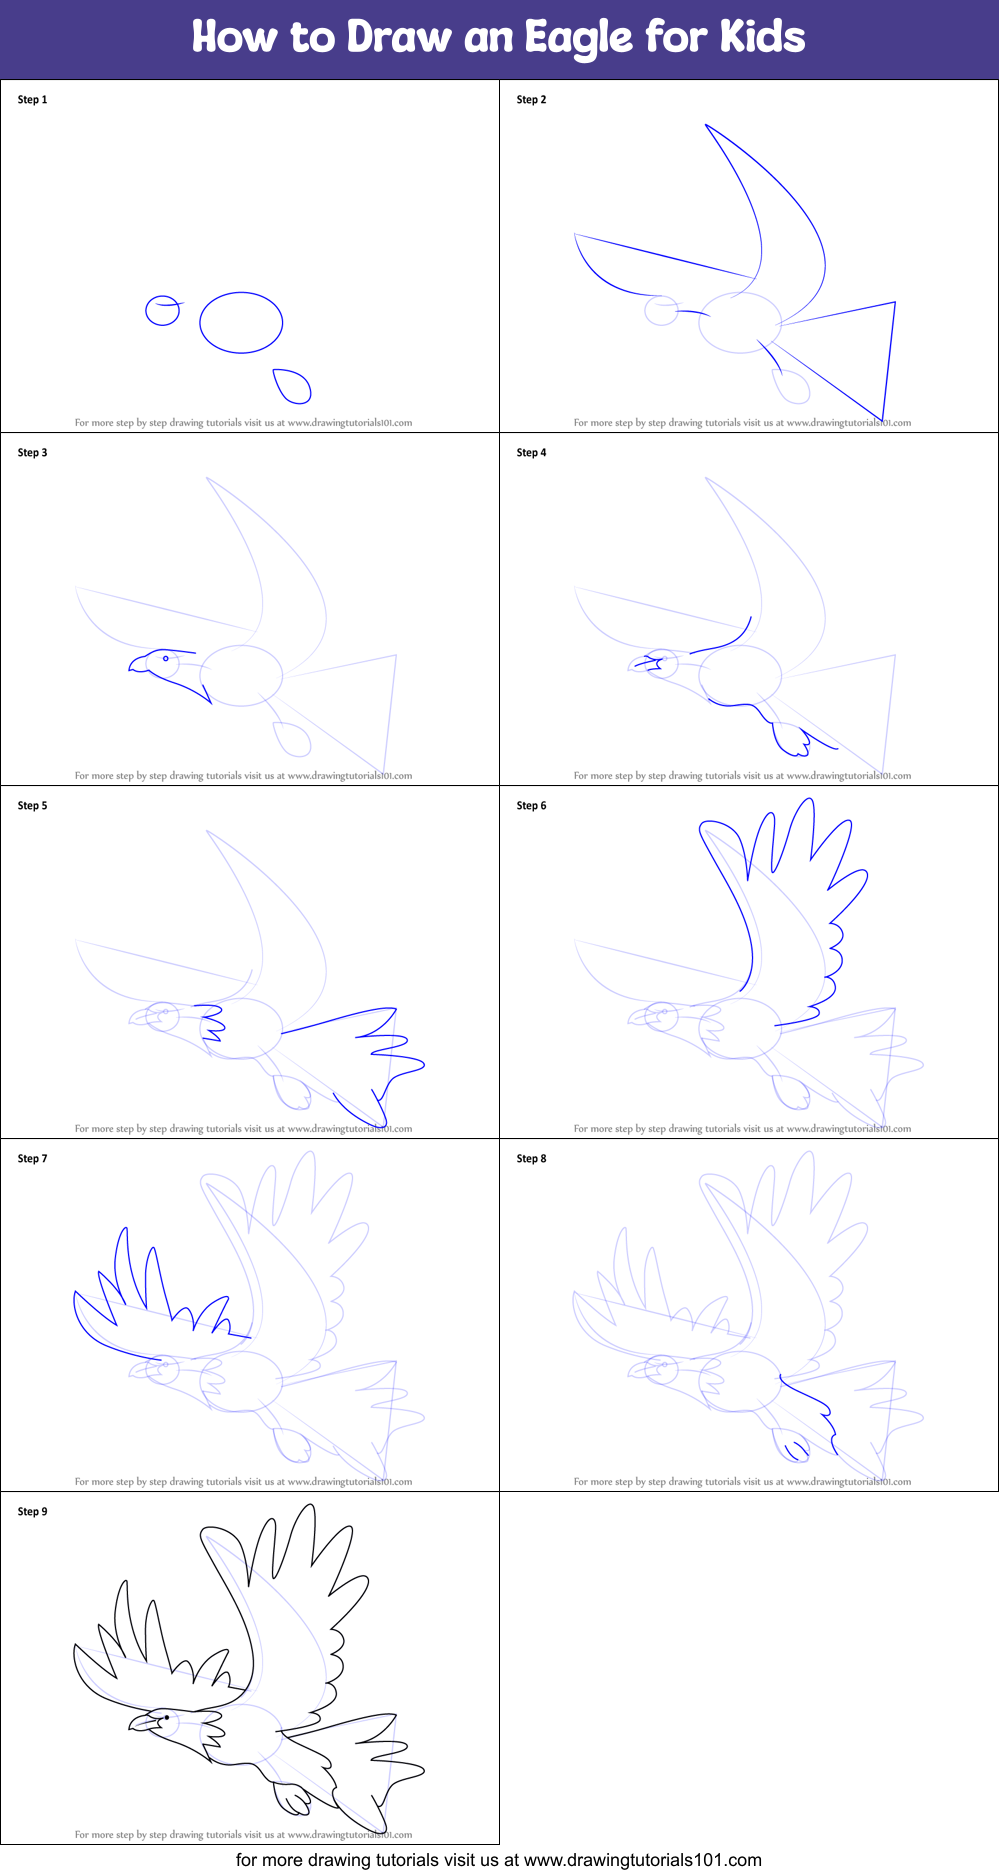 How to Draw an Eagle for Kids printable step by step